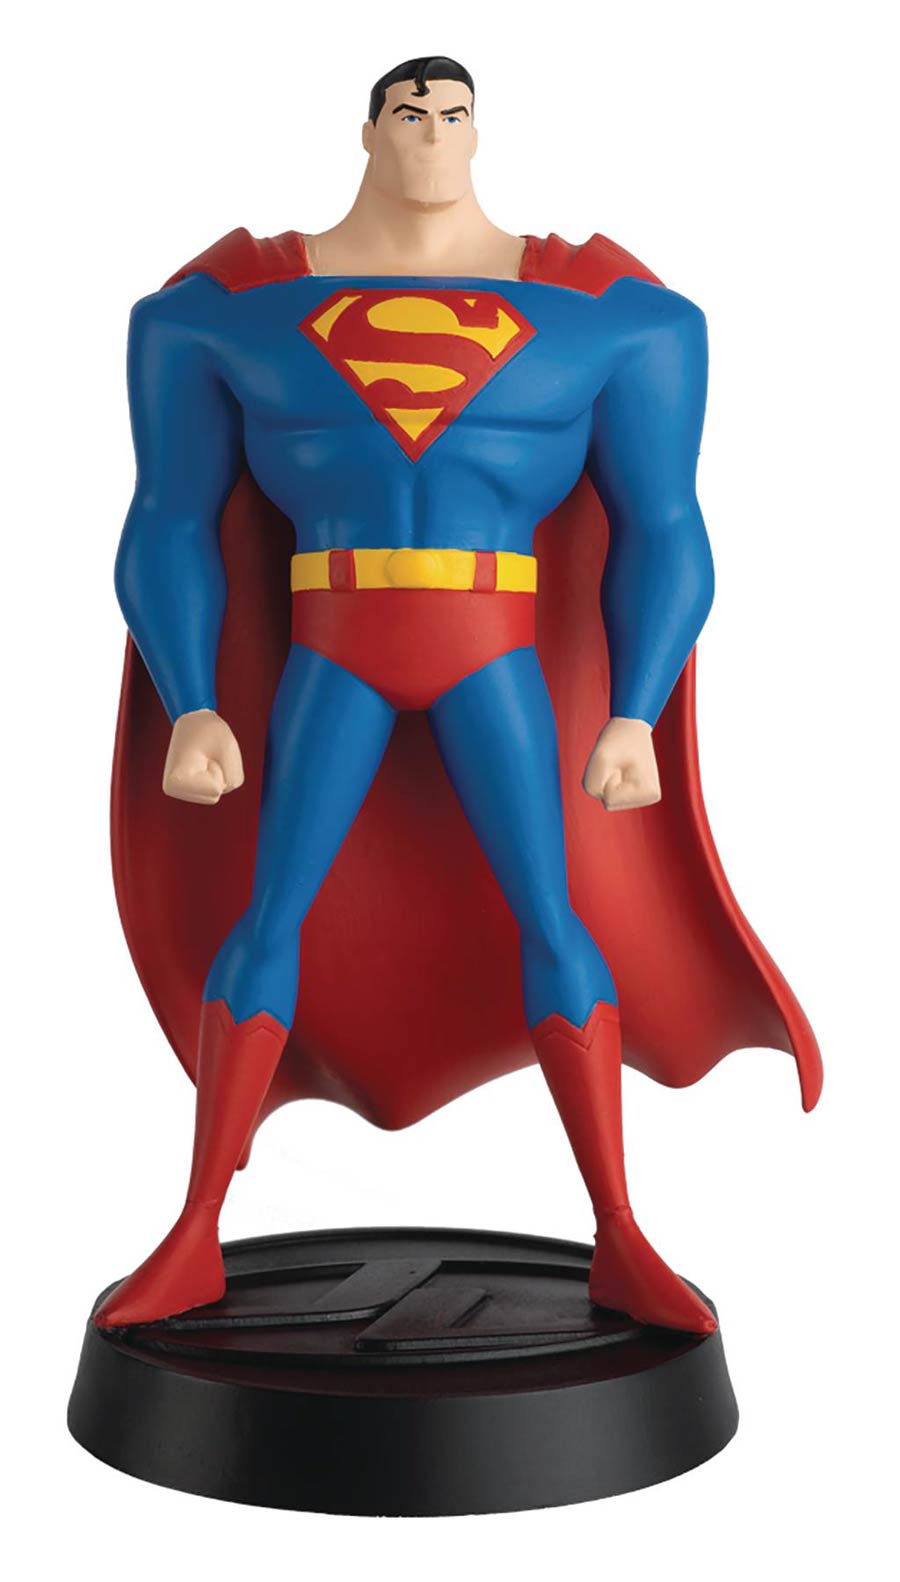 DC Justice League The Animated Series Figurine Collection Series 1 #1 Superman